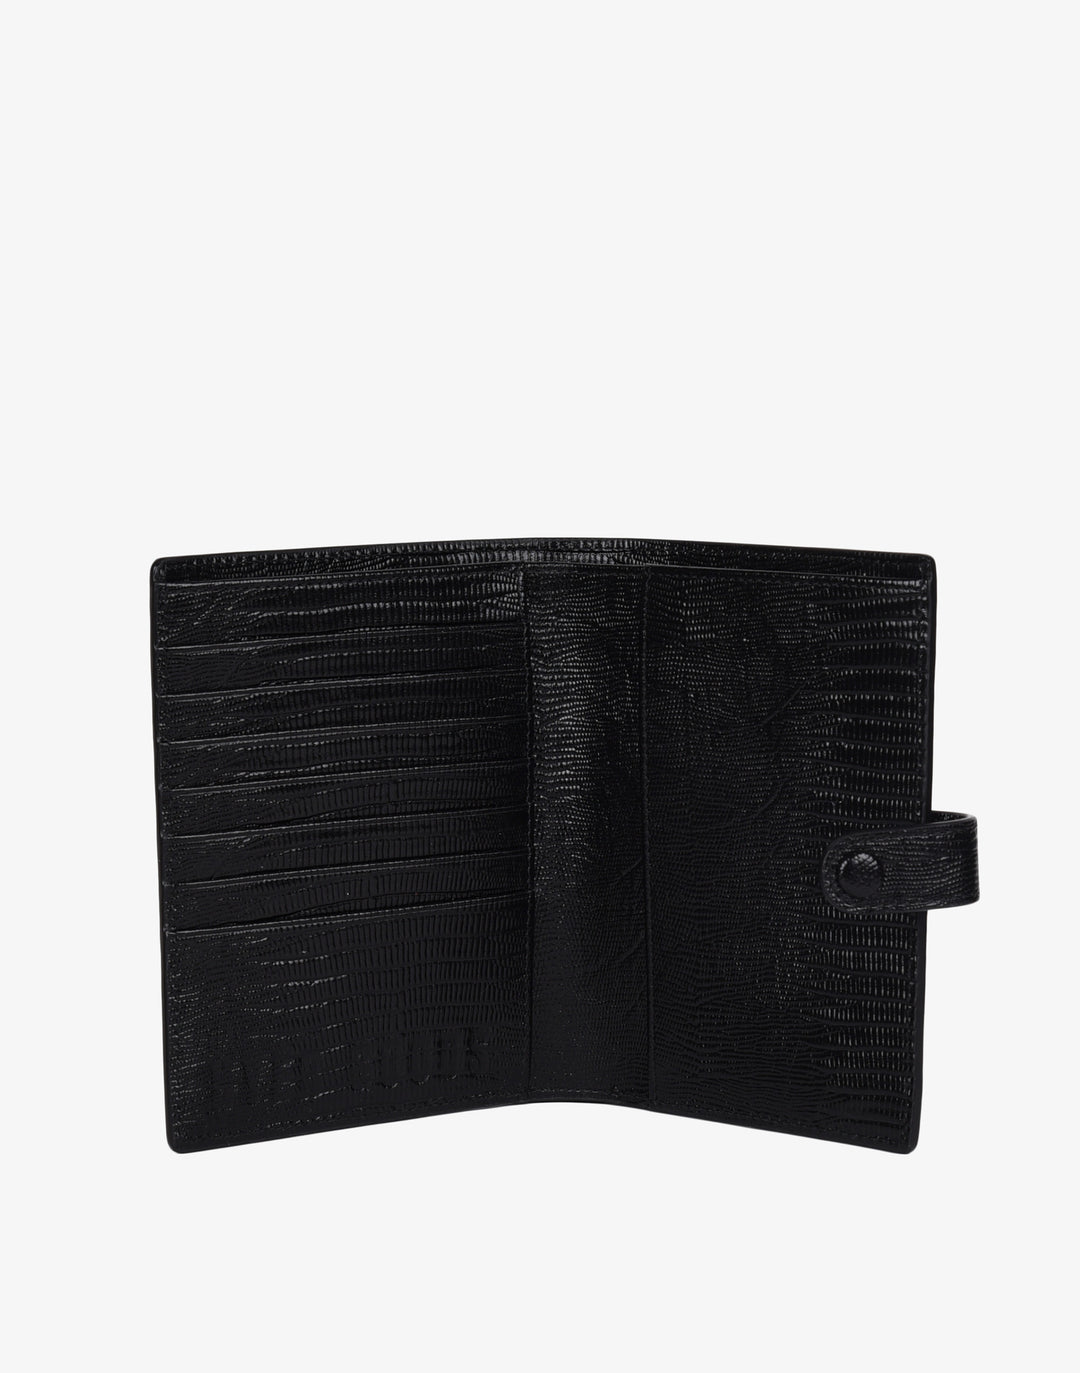 hyer goods recycled leather travel passport wallet embossed black lizard#color_black-lizard